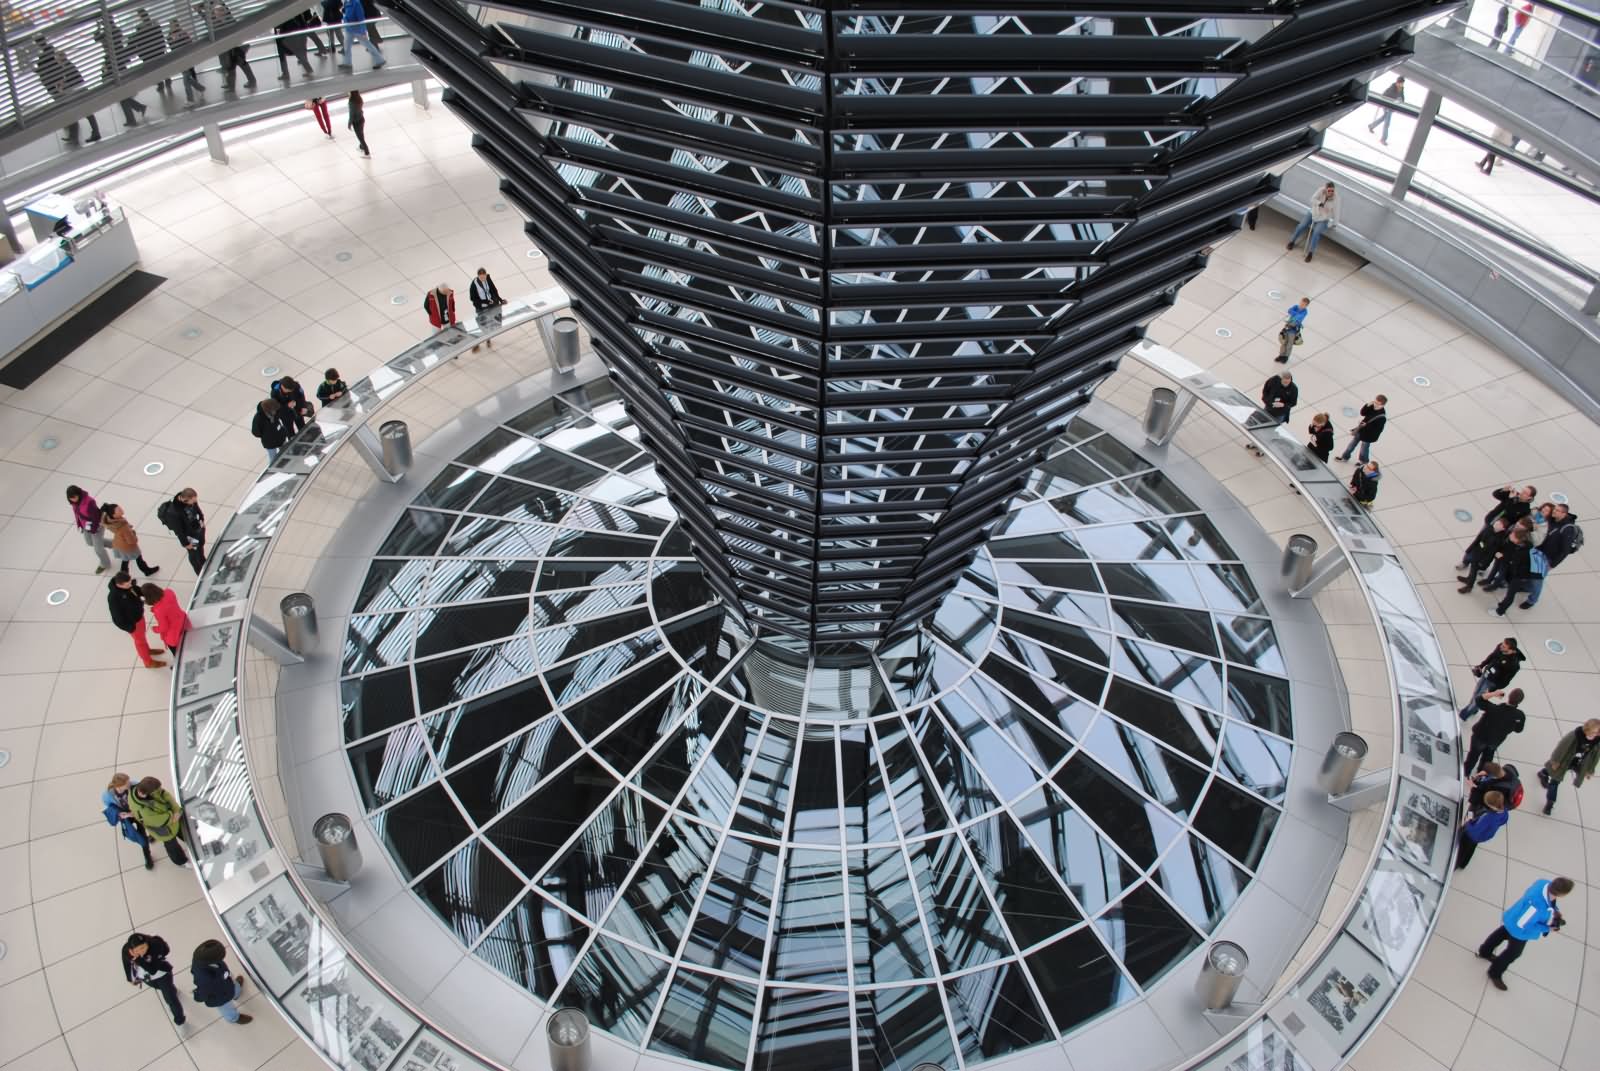 20 Incredible Interior Pictures And Photos Of The Reichstag Building In Berlin, German